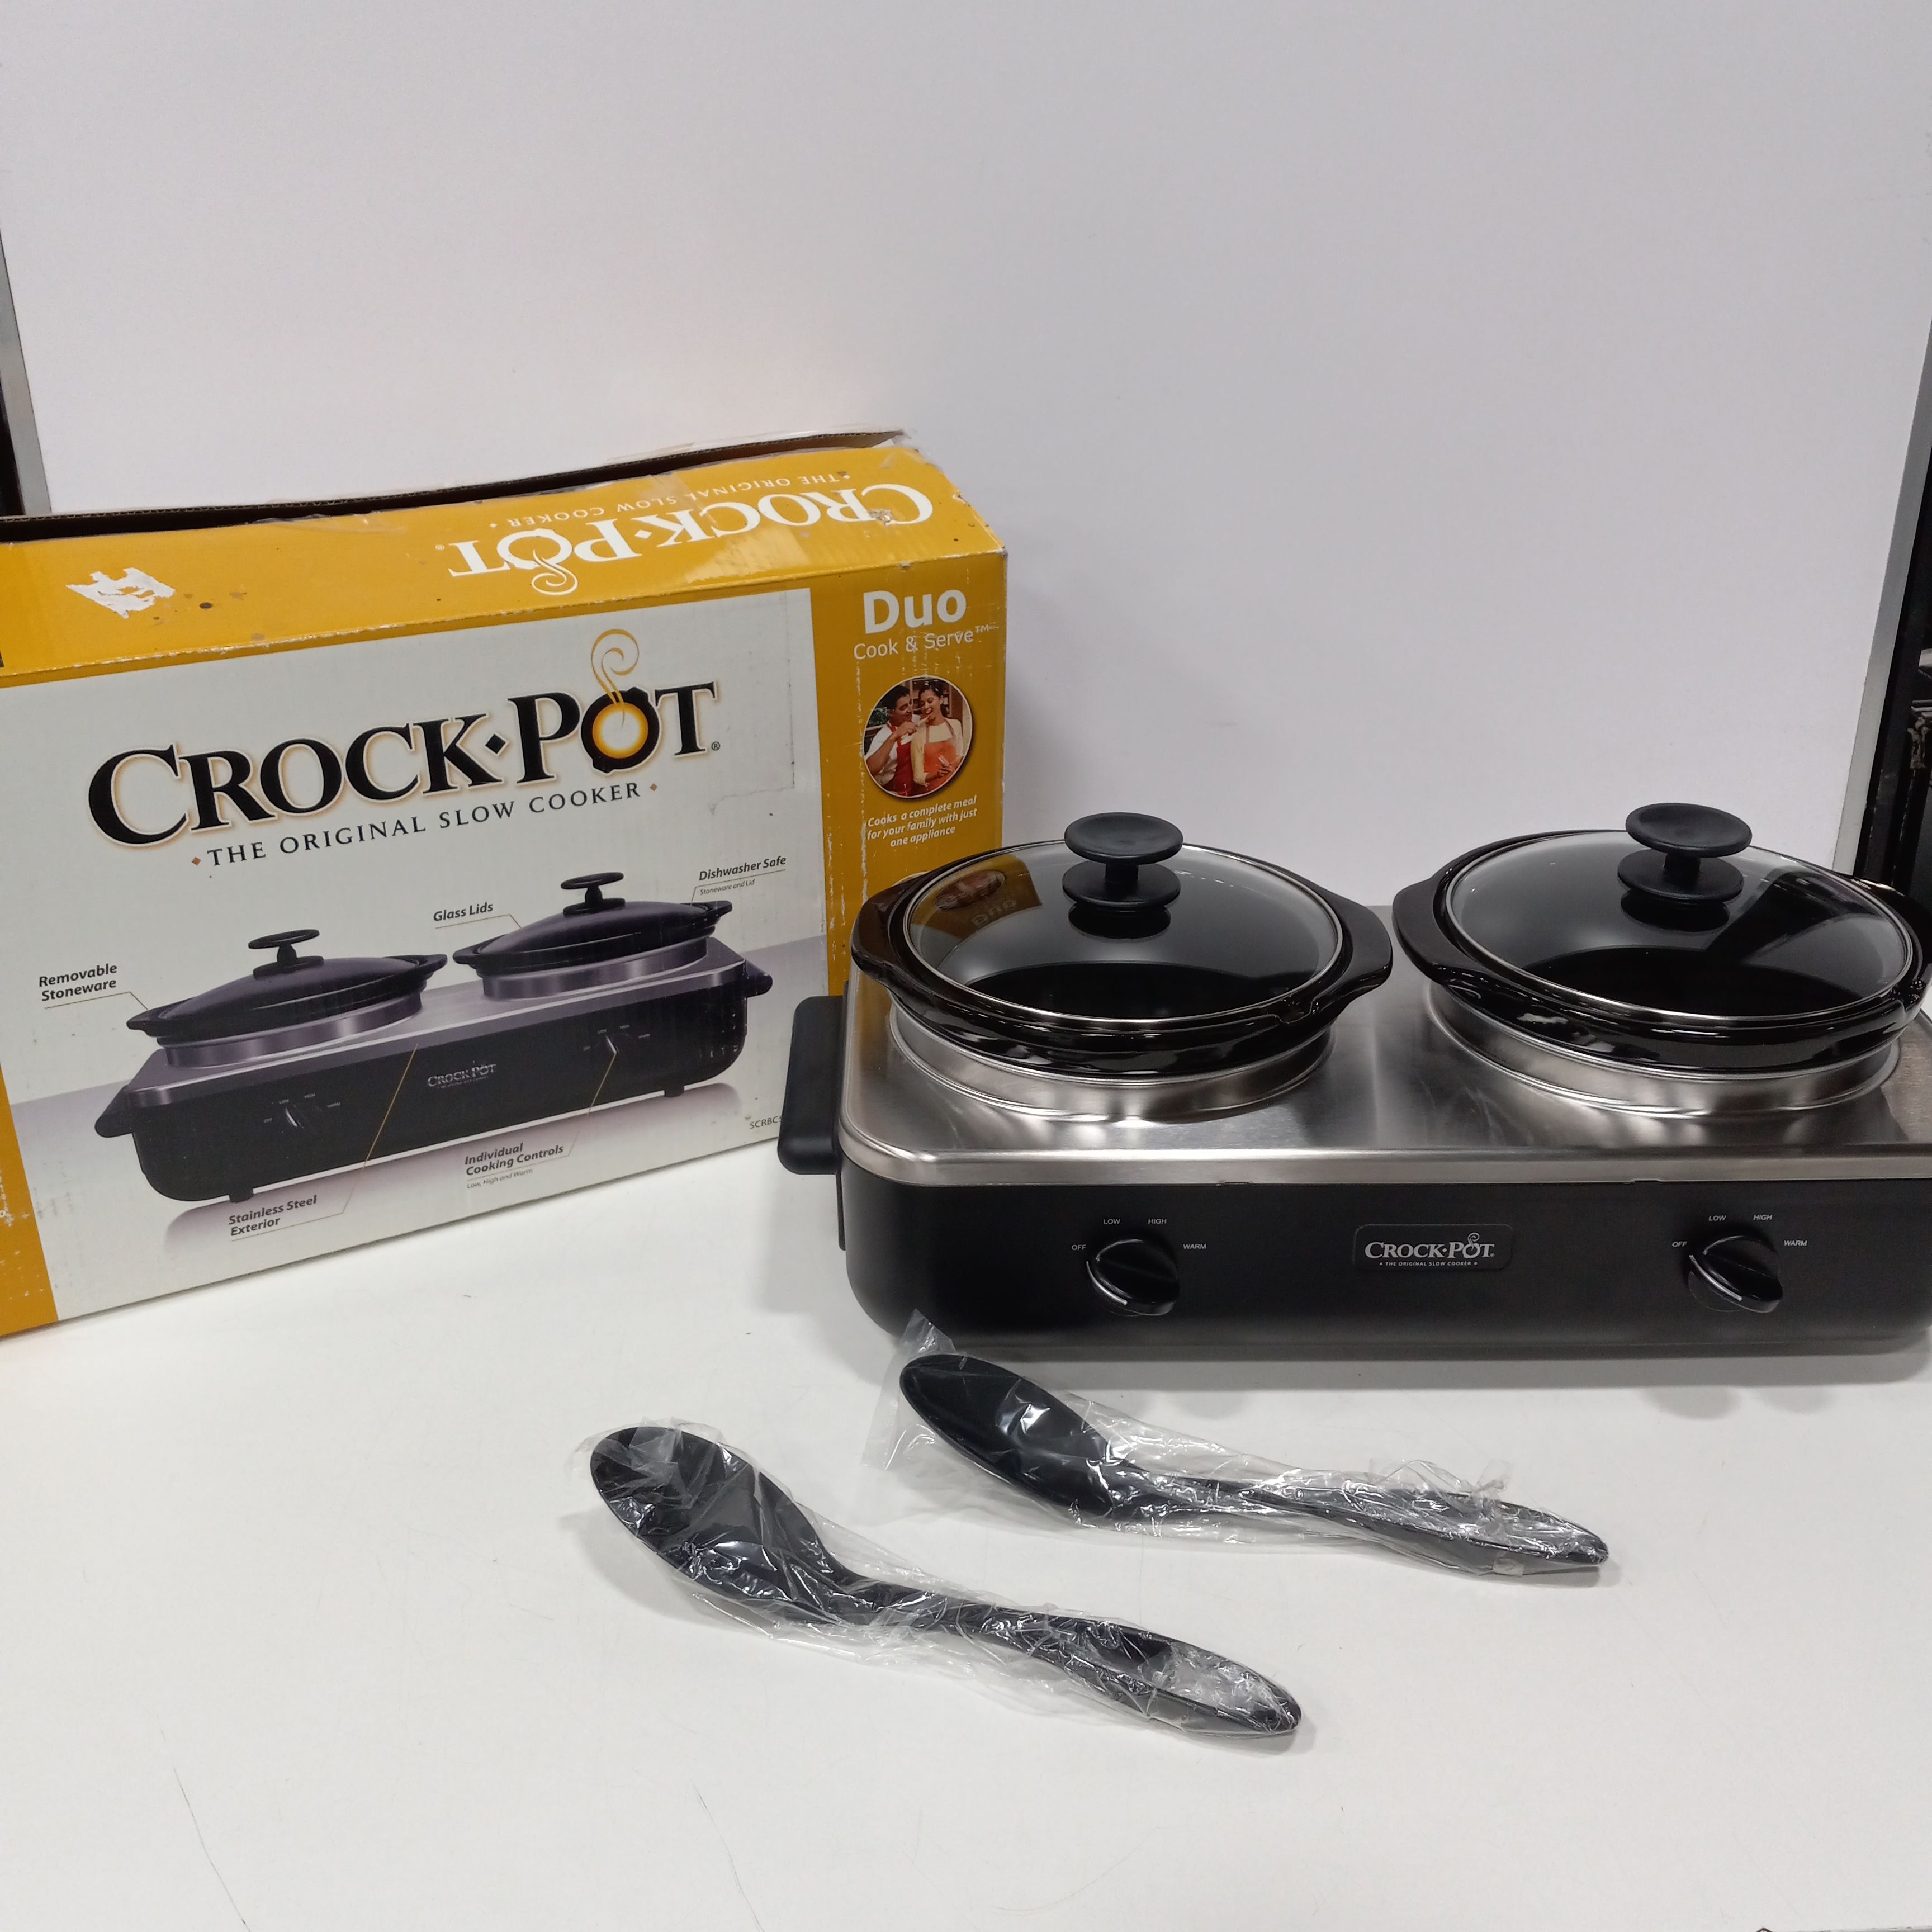 Crock-Pot Trio Cook and Serve Slow Cooker and Food Warmer